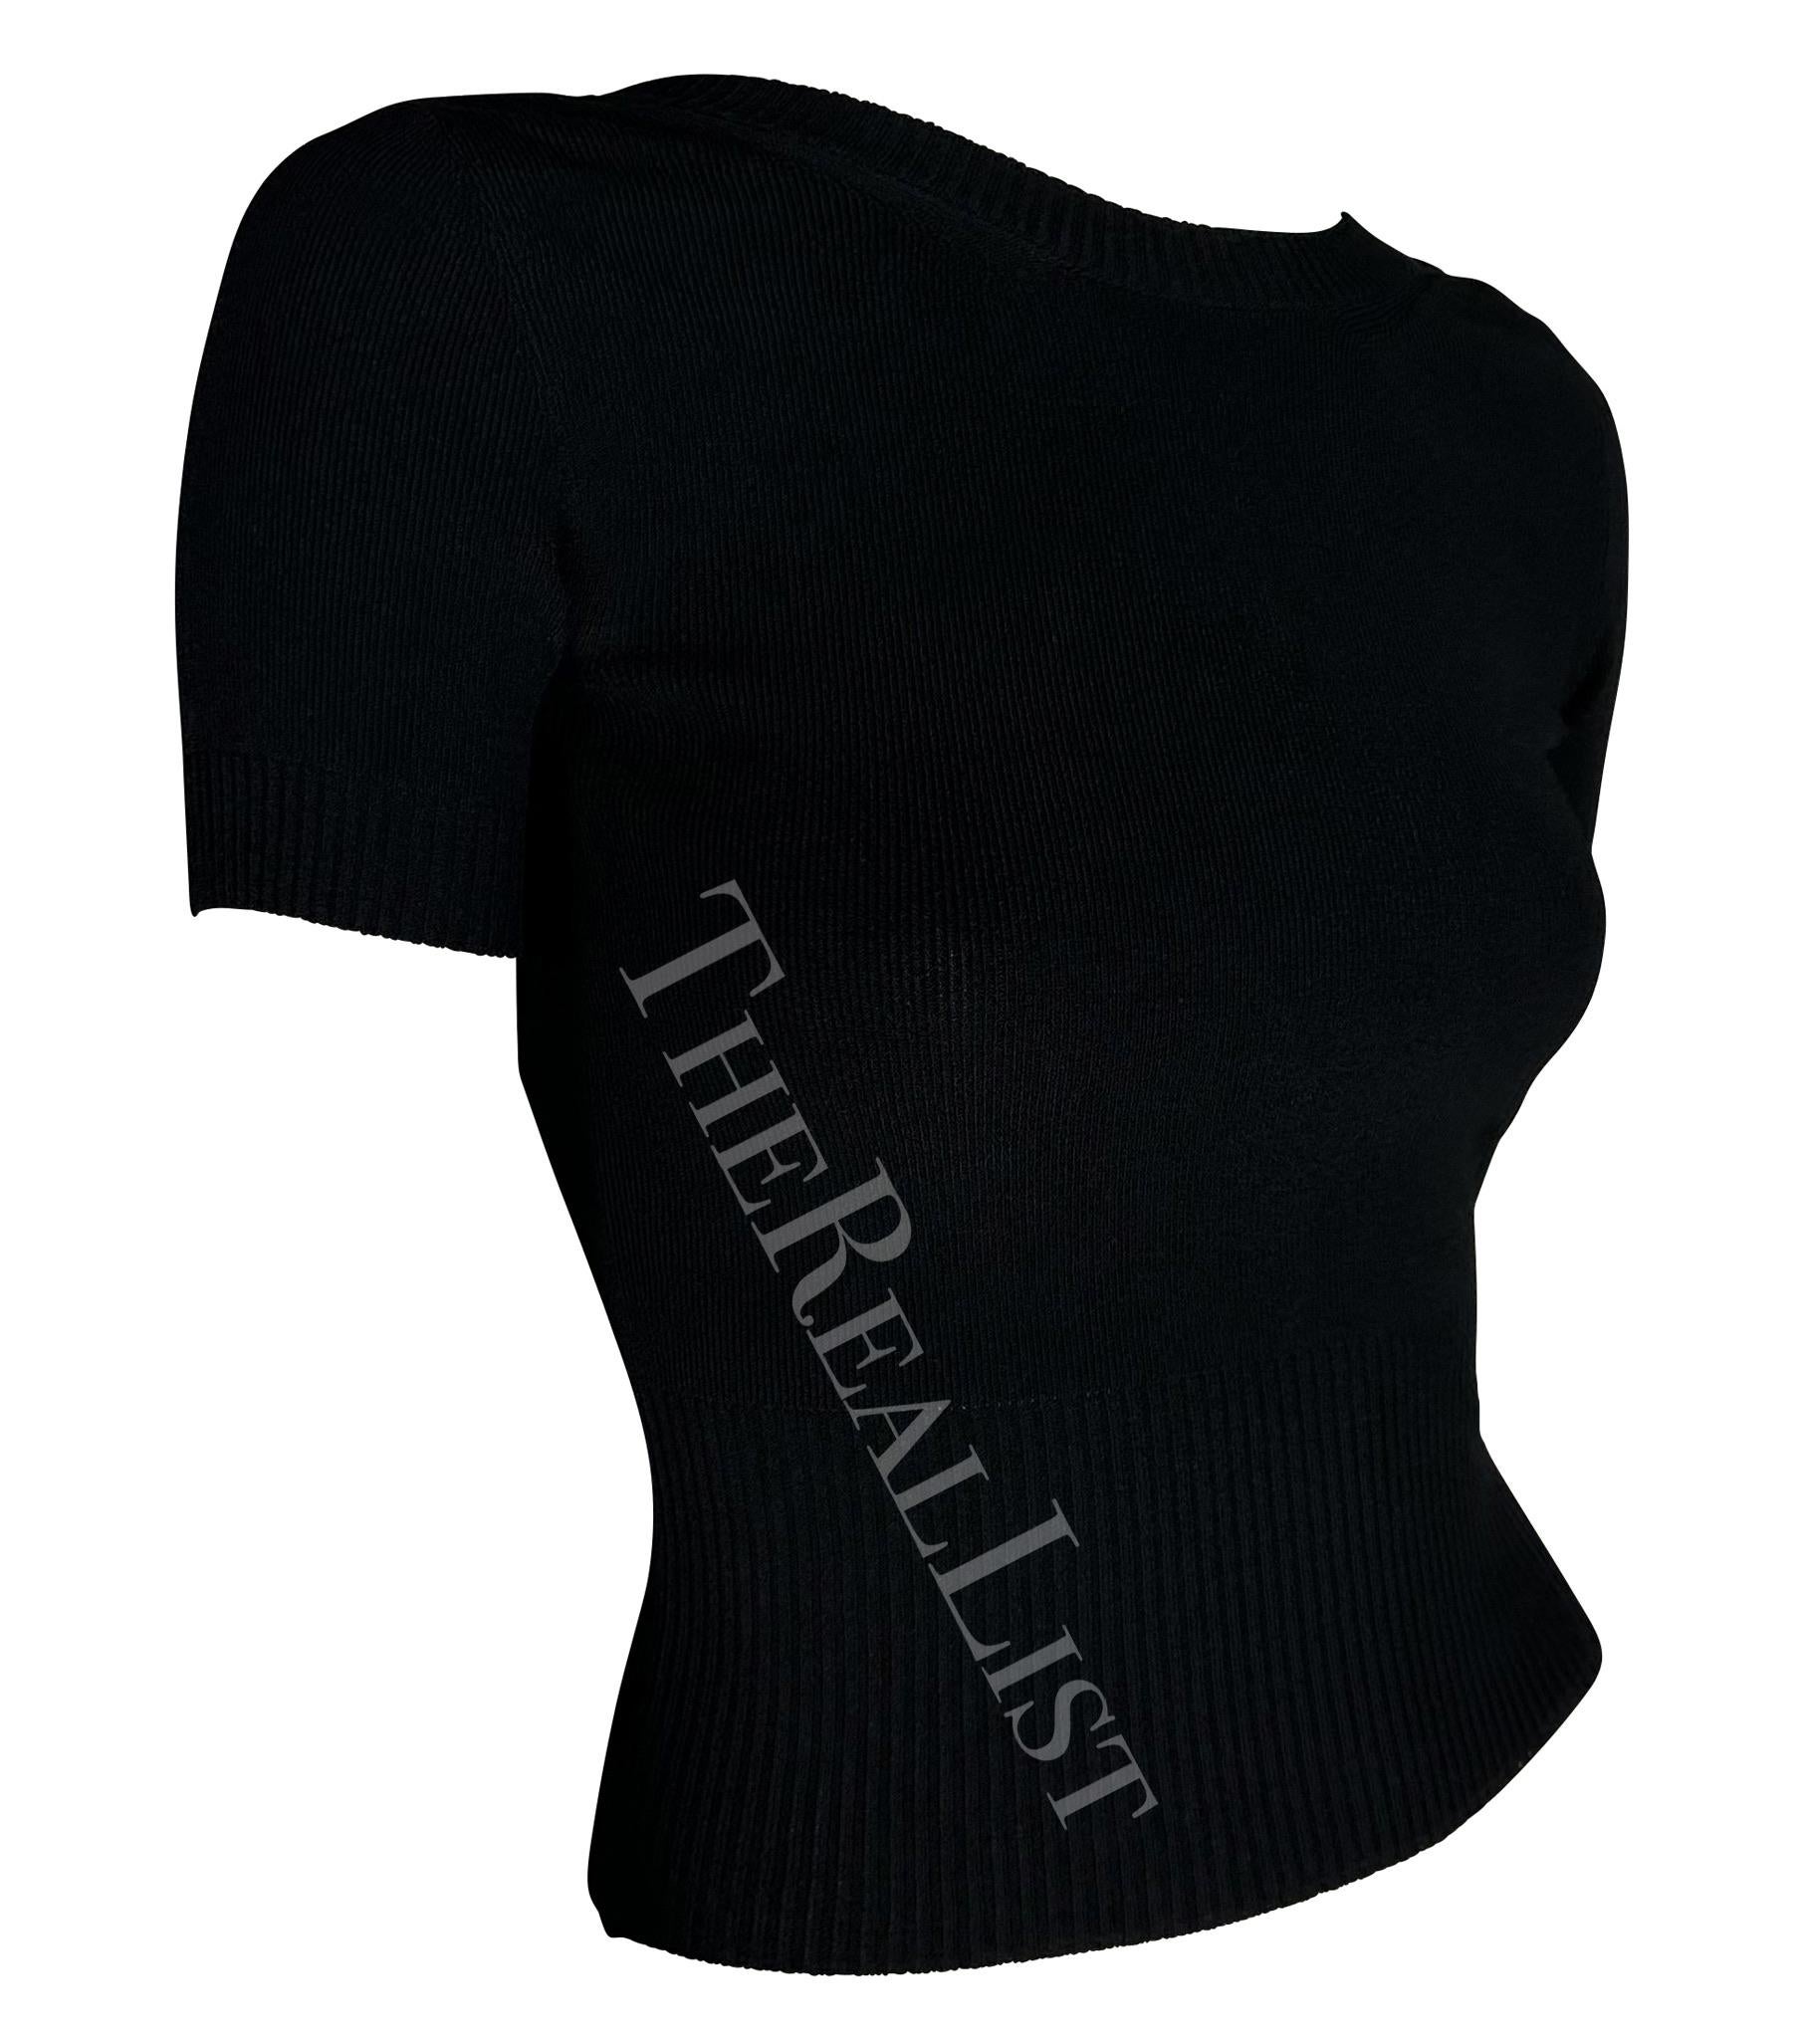 Late 1990s Dolce & Gabbana Runway Black Knit Backless Sweater Crop Top In Excellent Condition For Sale In West Hollywood, CA